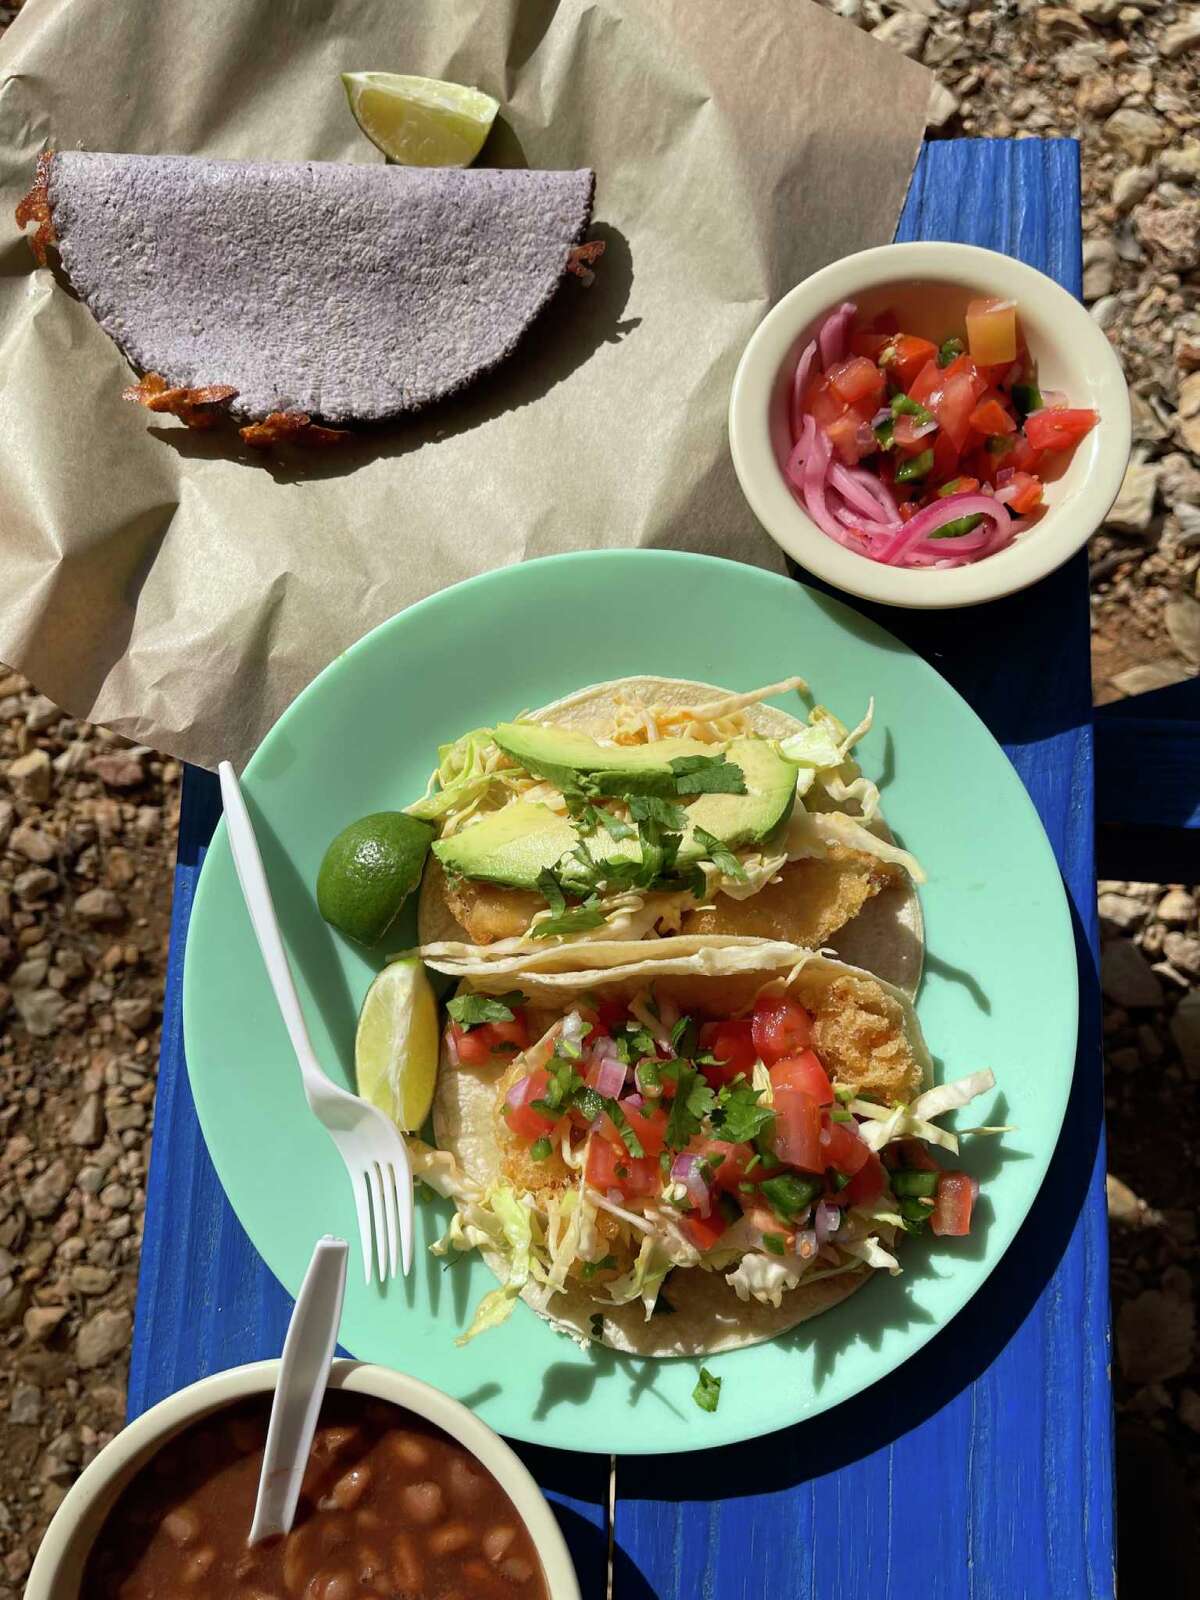 Fish tacos are one of the specialties at Carnitas Lonja.